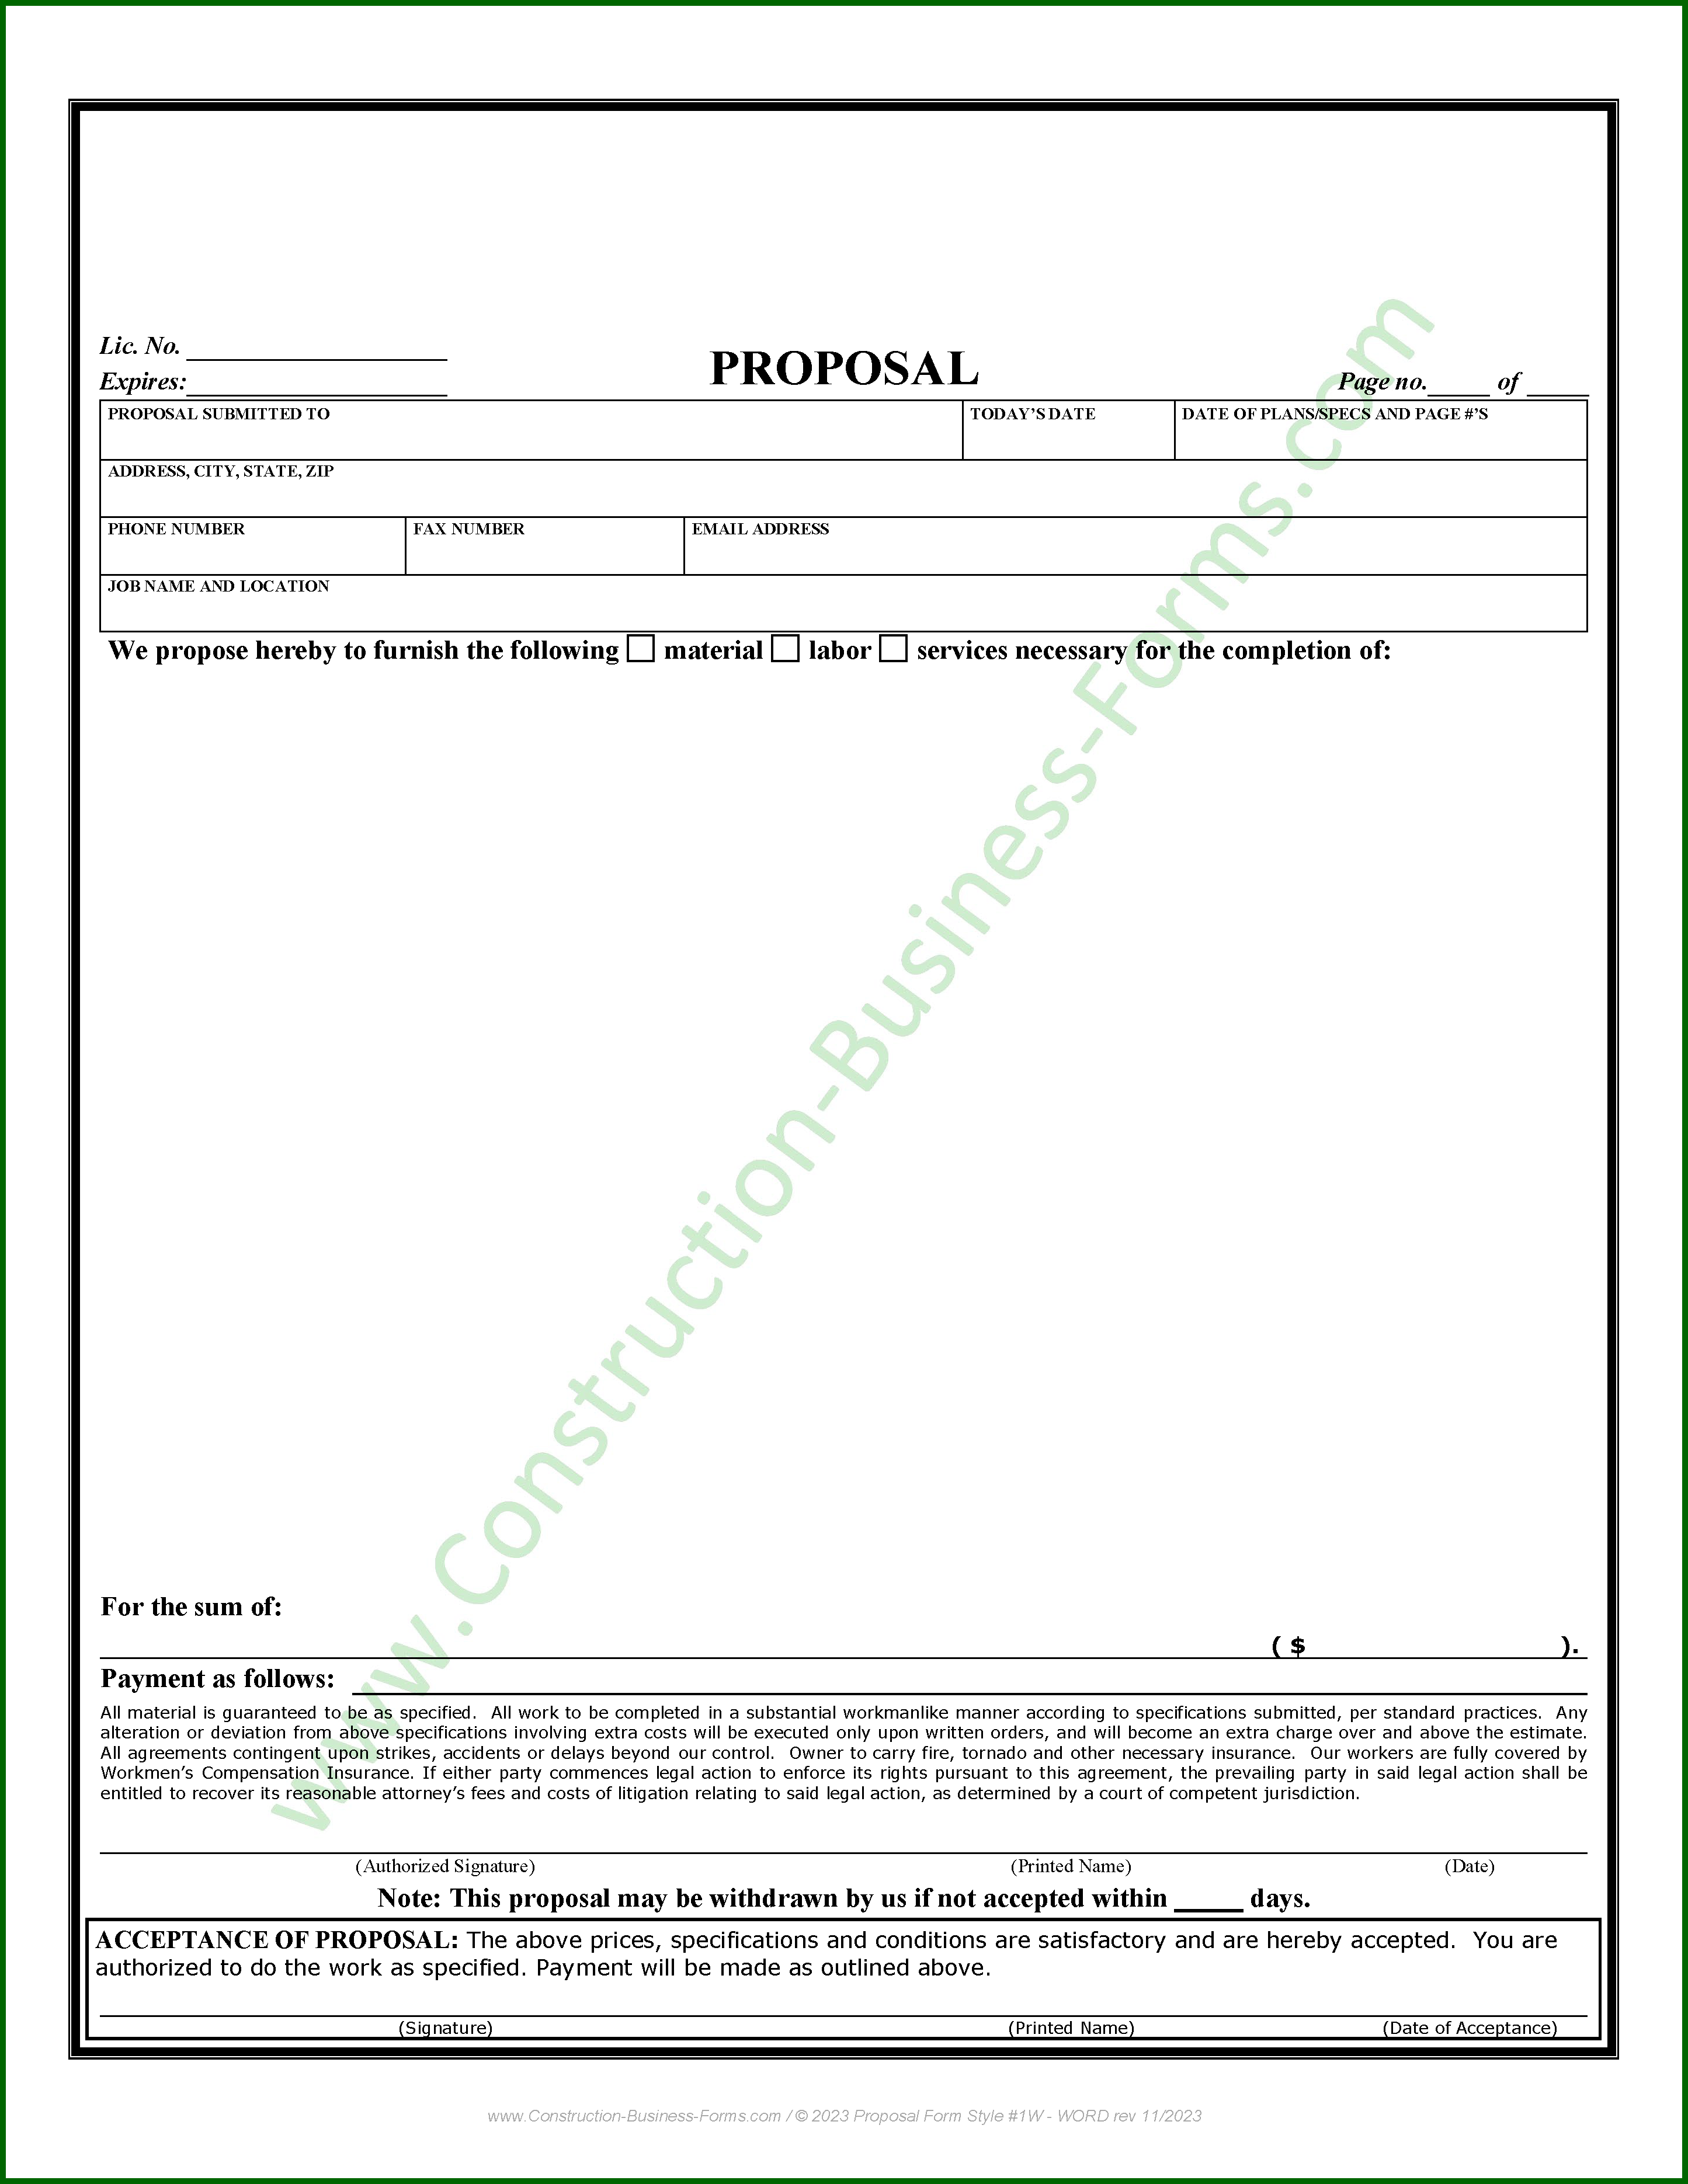 Image of, and link to, a bid proposal template to bid construction jobs.